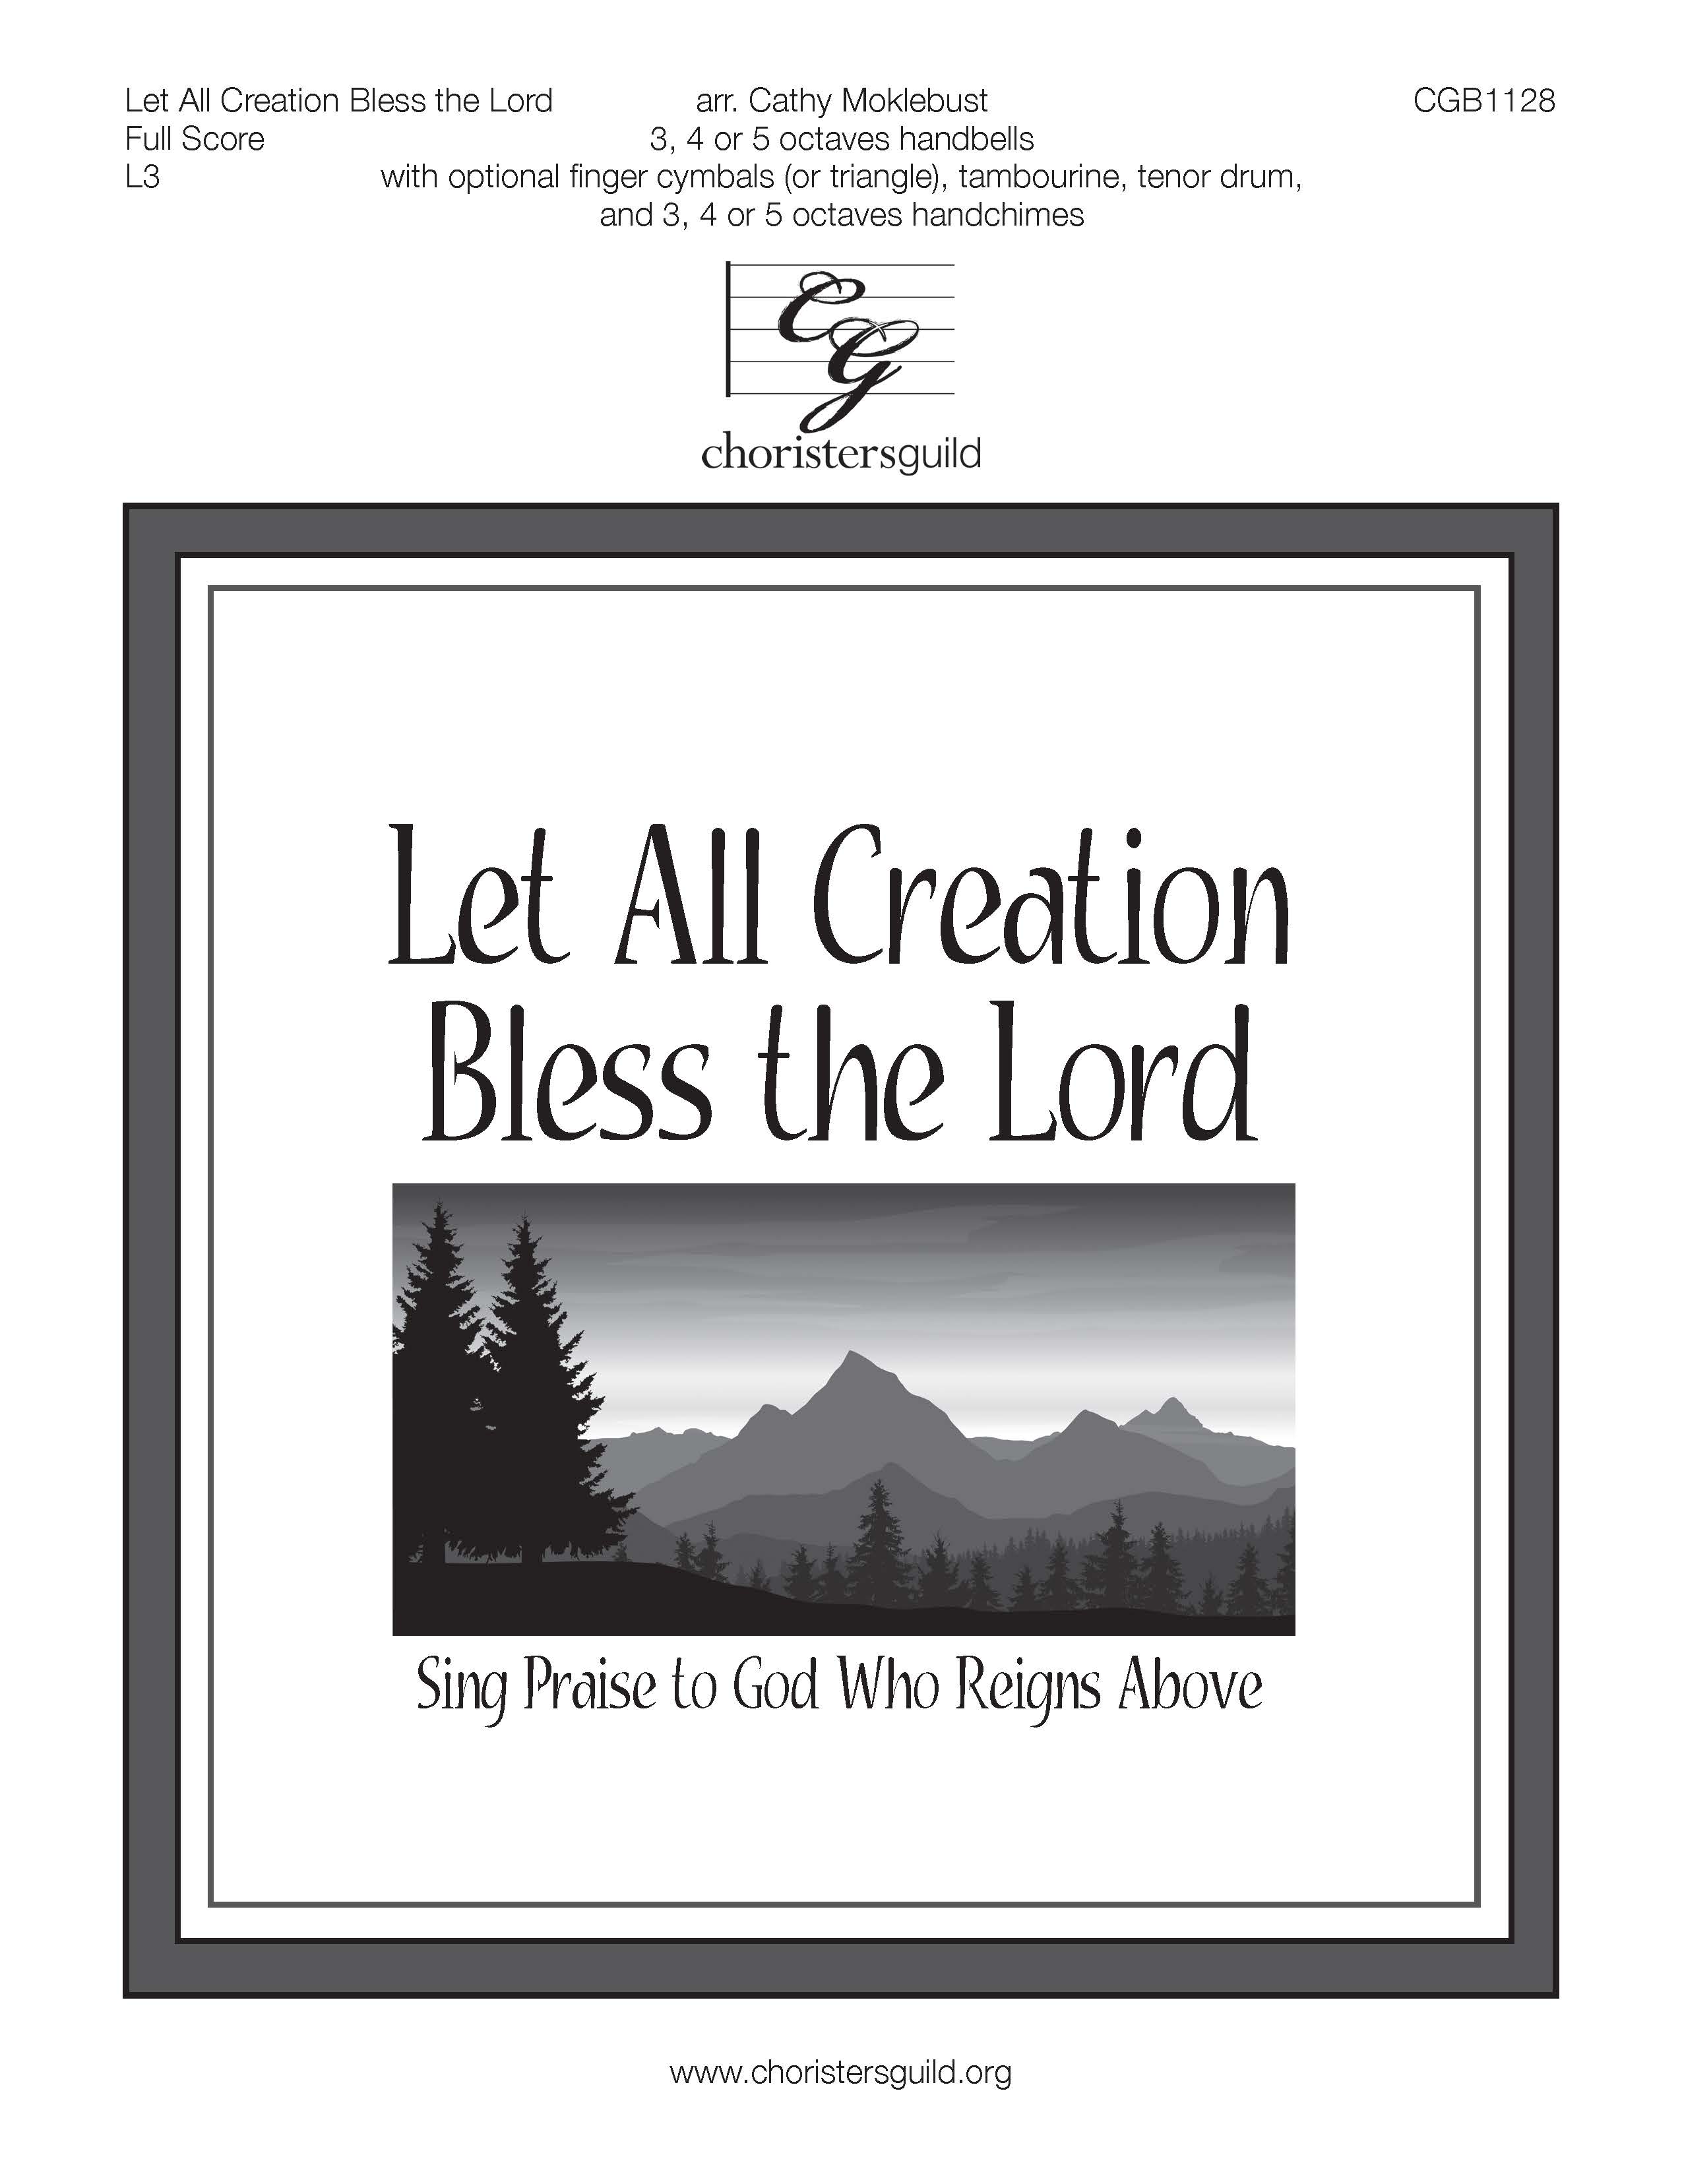 Let All Creation Bless the Lord - Full Score